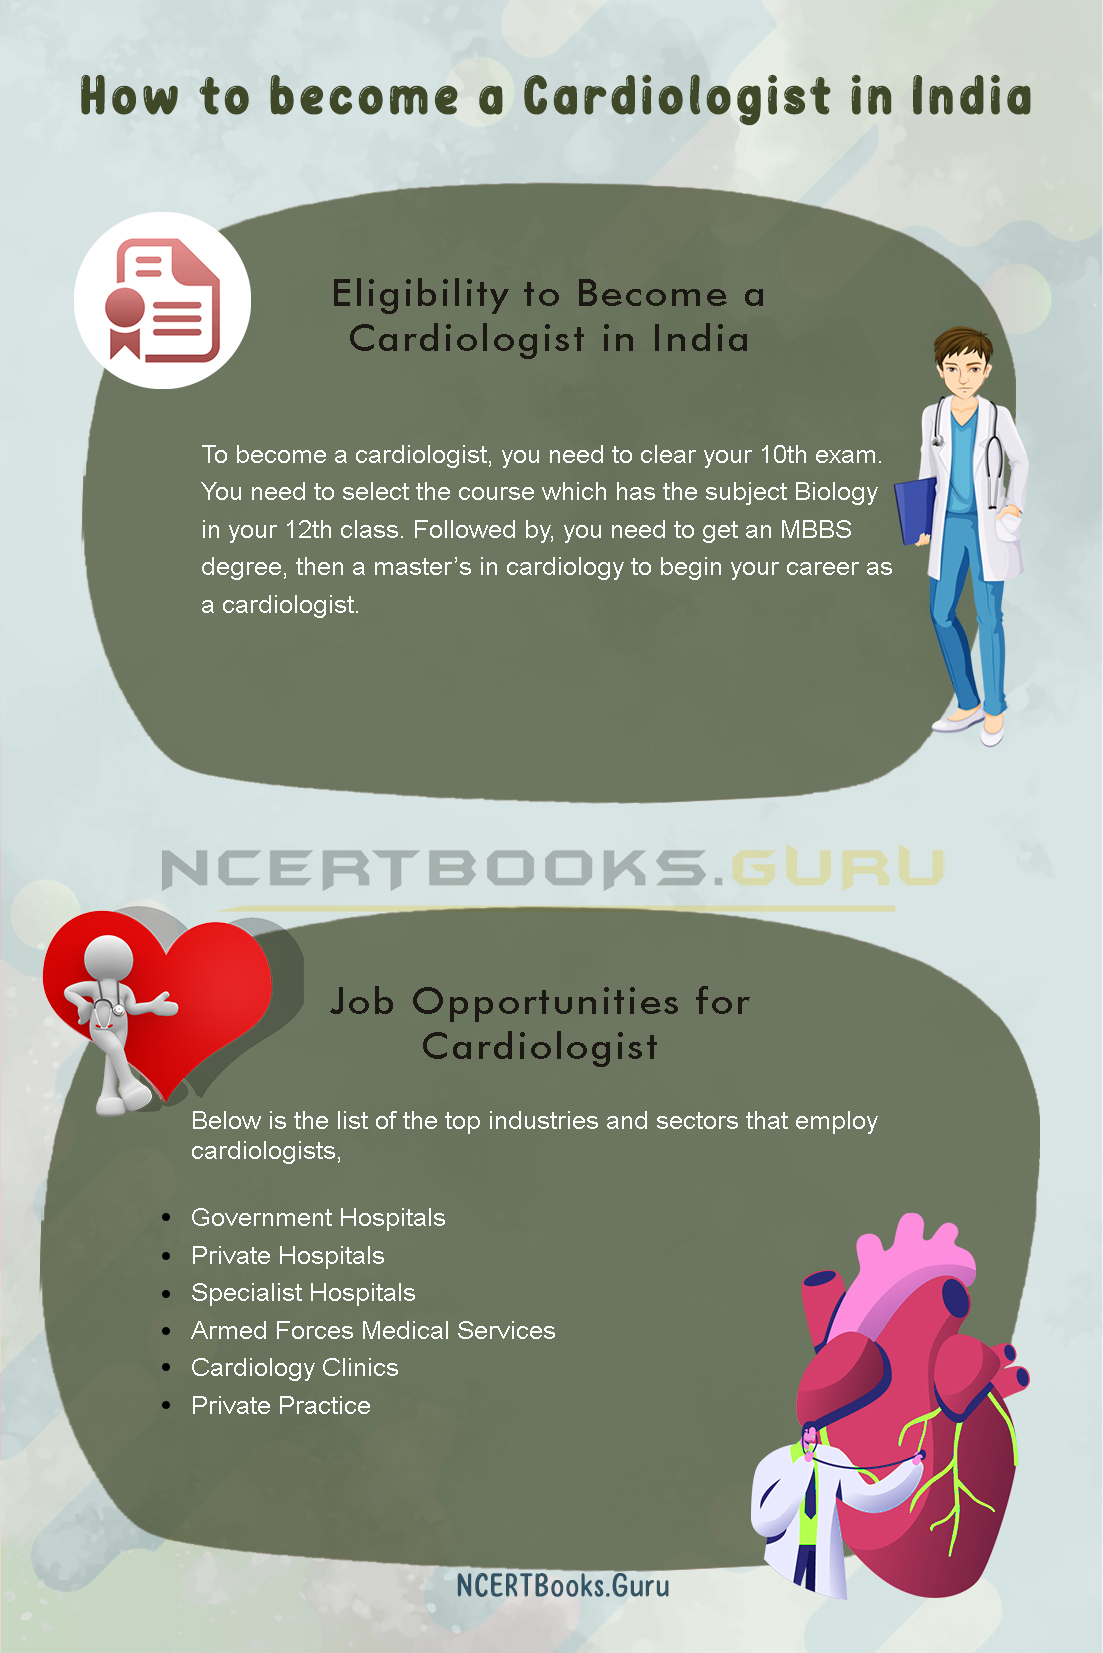 How to become a Cardiologist in India